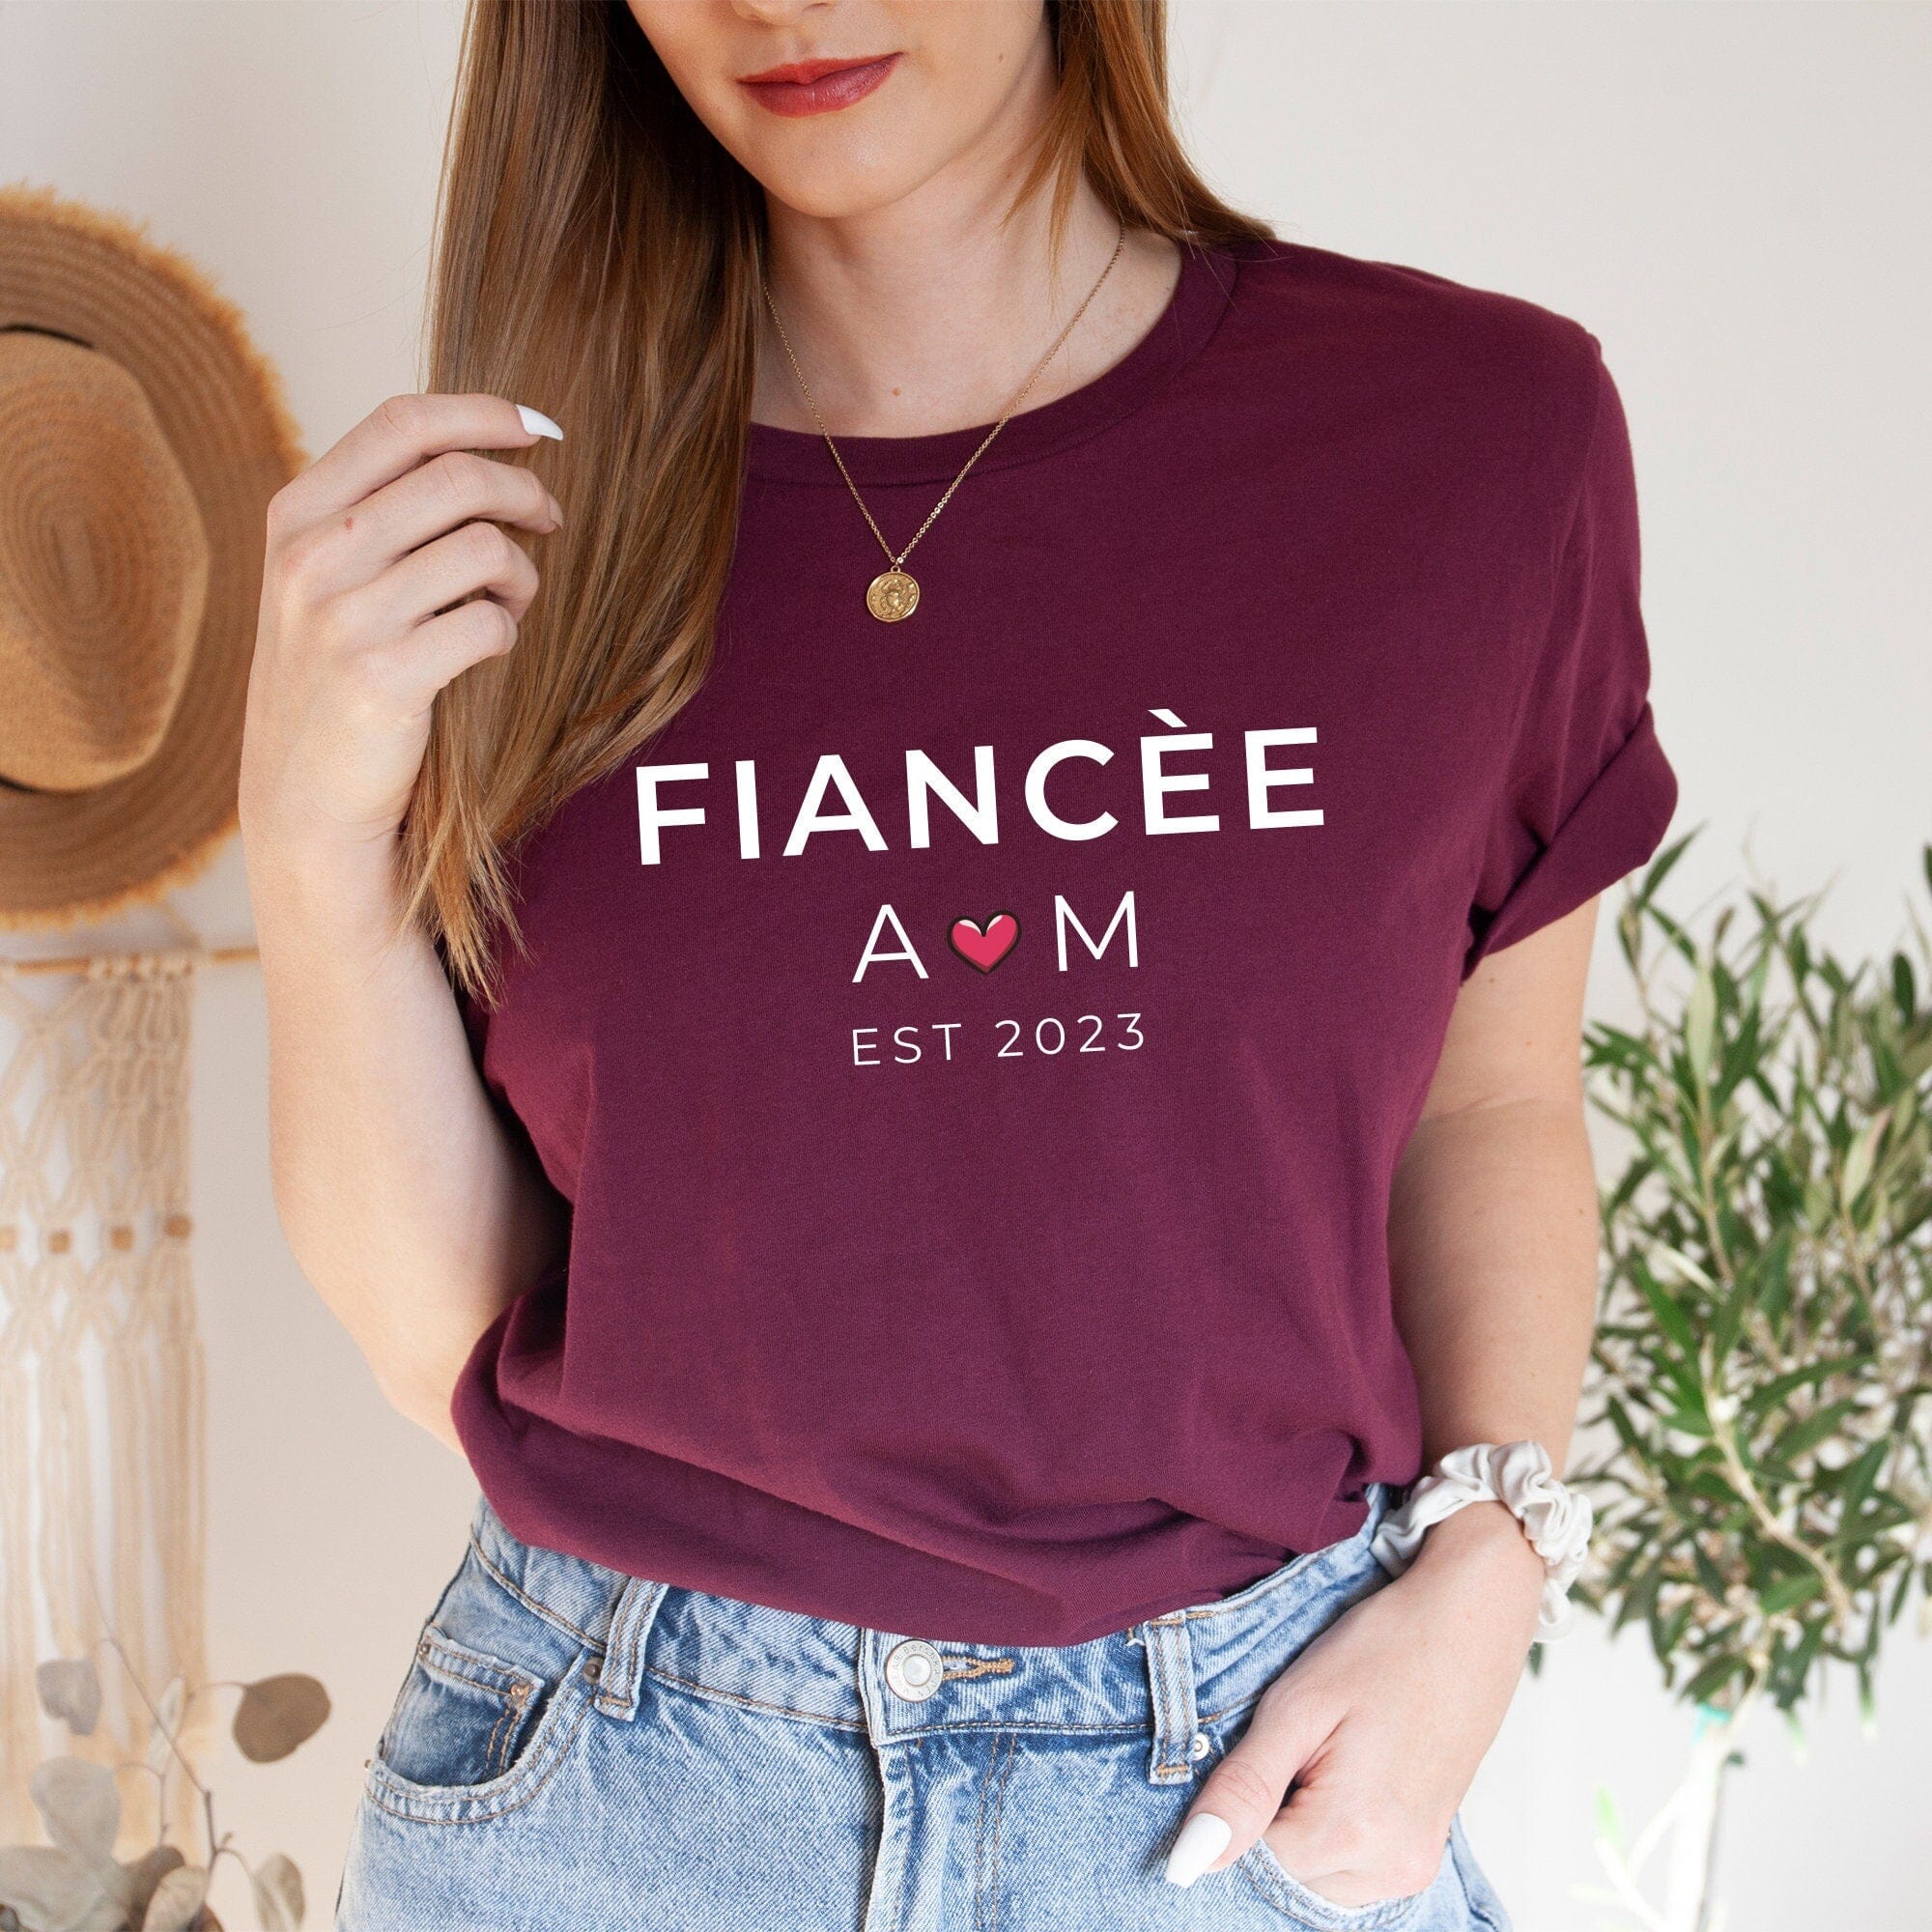 Personalised Fiance T-shirt with couple initials and wedding date, Bride to be Shirt